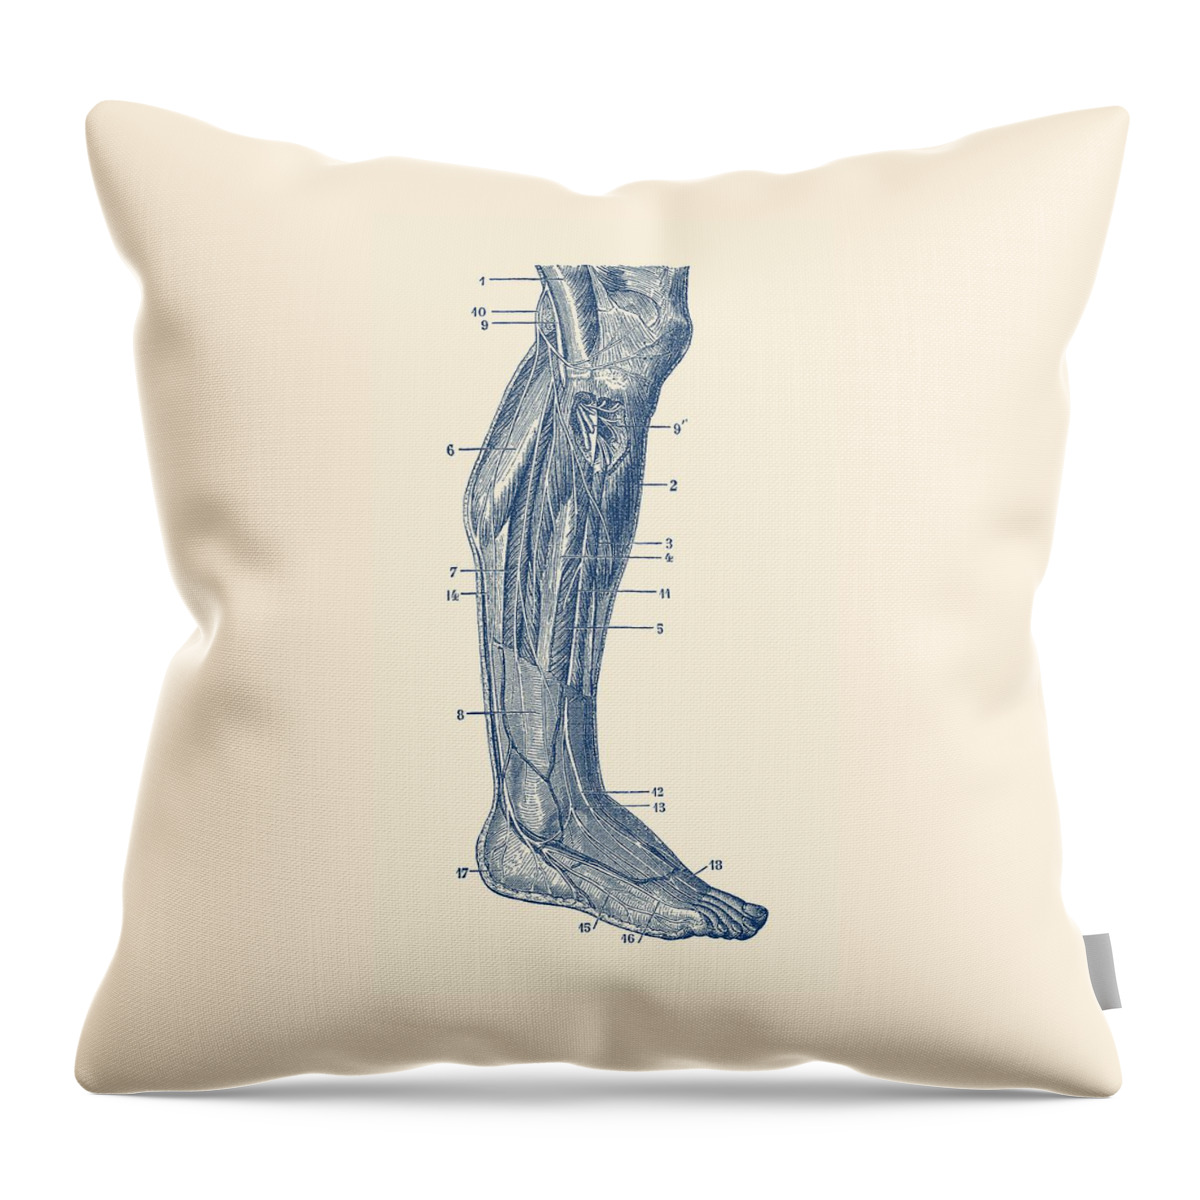 Muscles Throw Pillow featuring the drawing Muscular System - Right Leg - Vintage Anatomy Print by Vintage Anatomy Prints